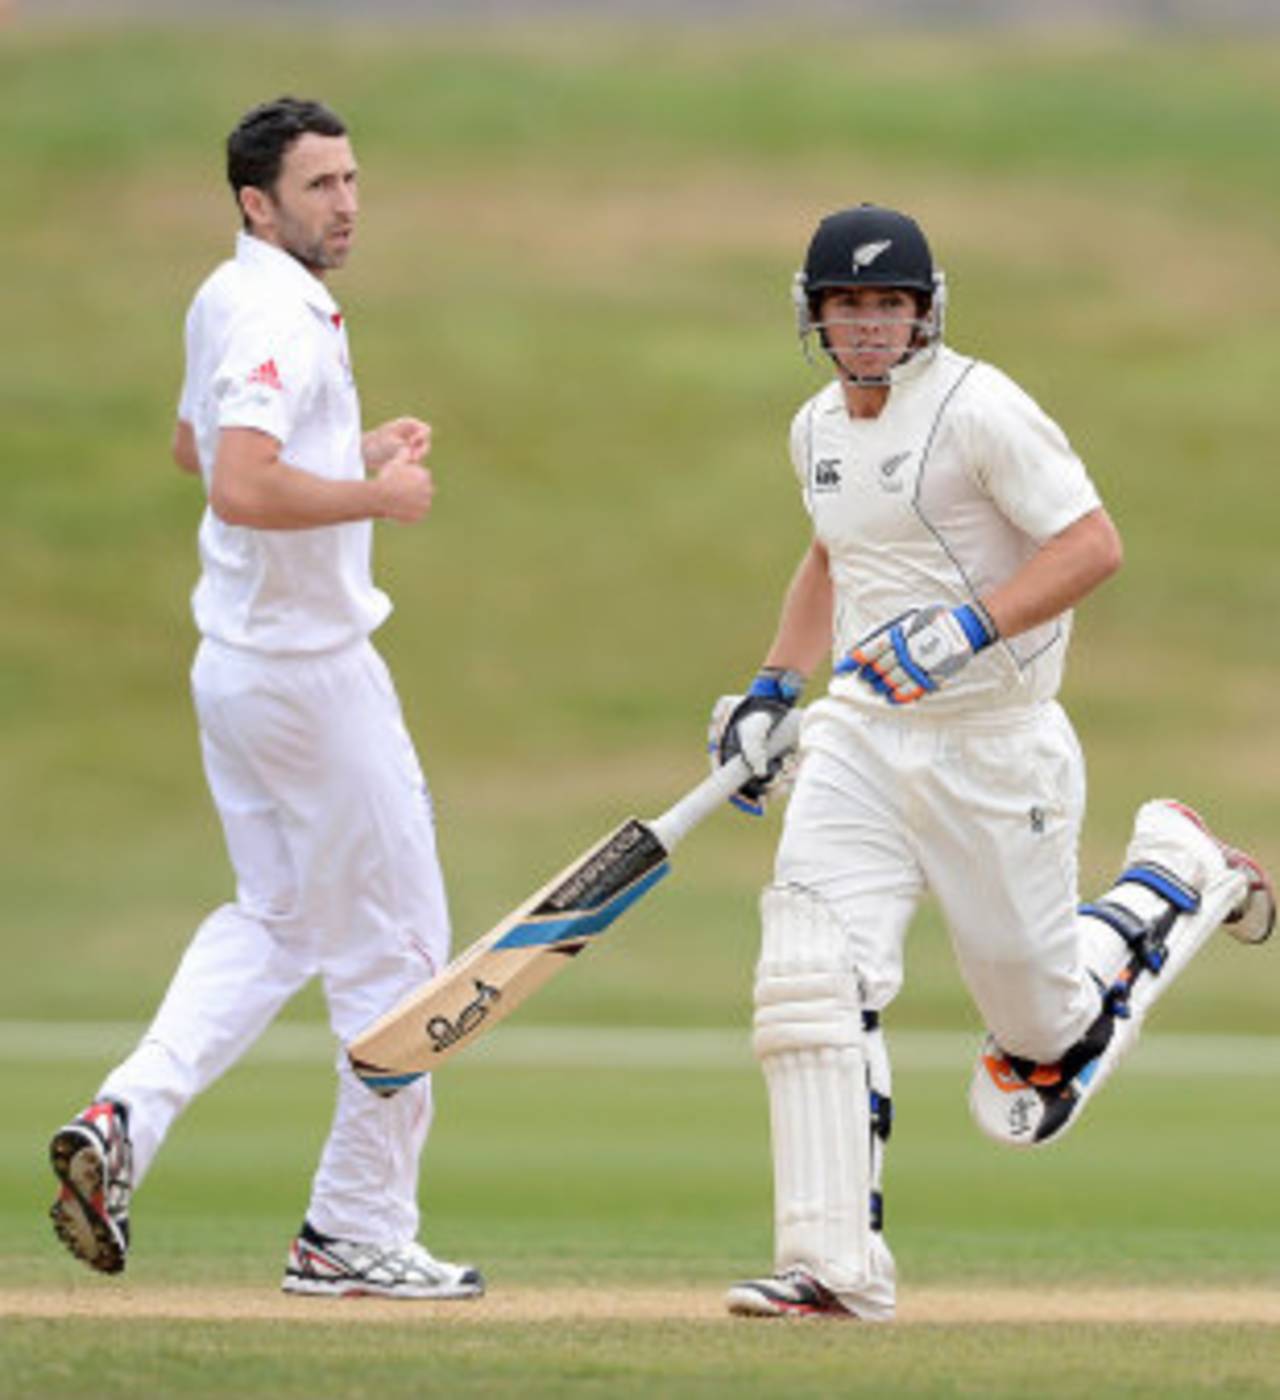 Tom Latham is the second highest run-scorer in the Plunket Shield this season at an average of 68.70&nbsp;&nbsp;&bull;&nbsp;&nbsp;Getty Images